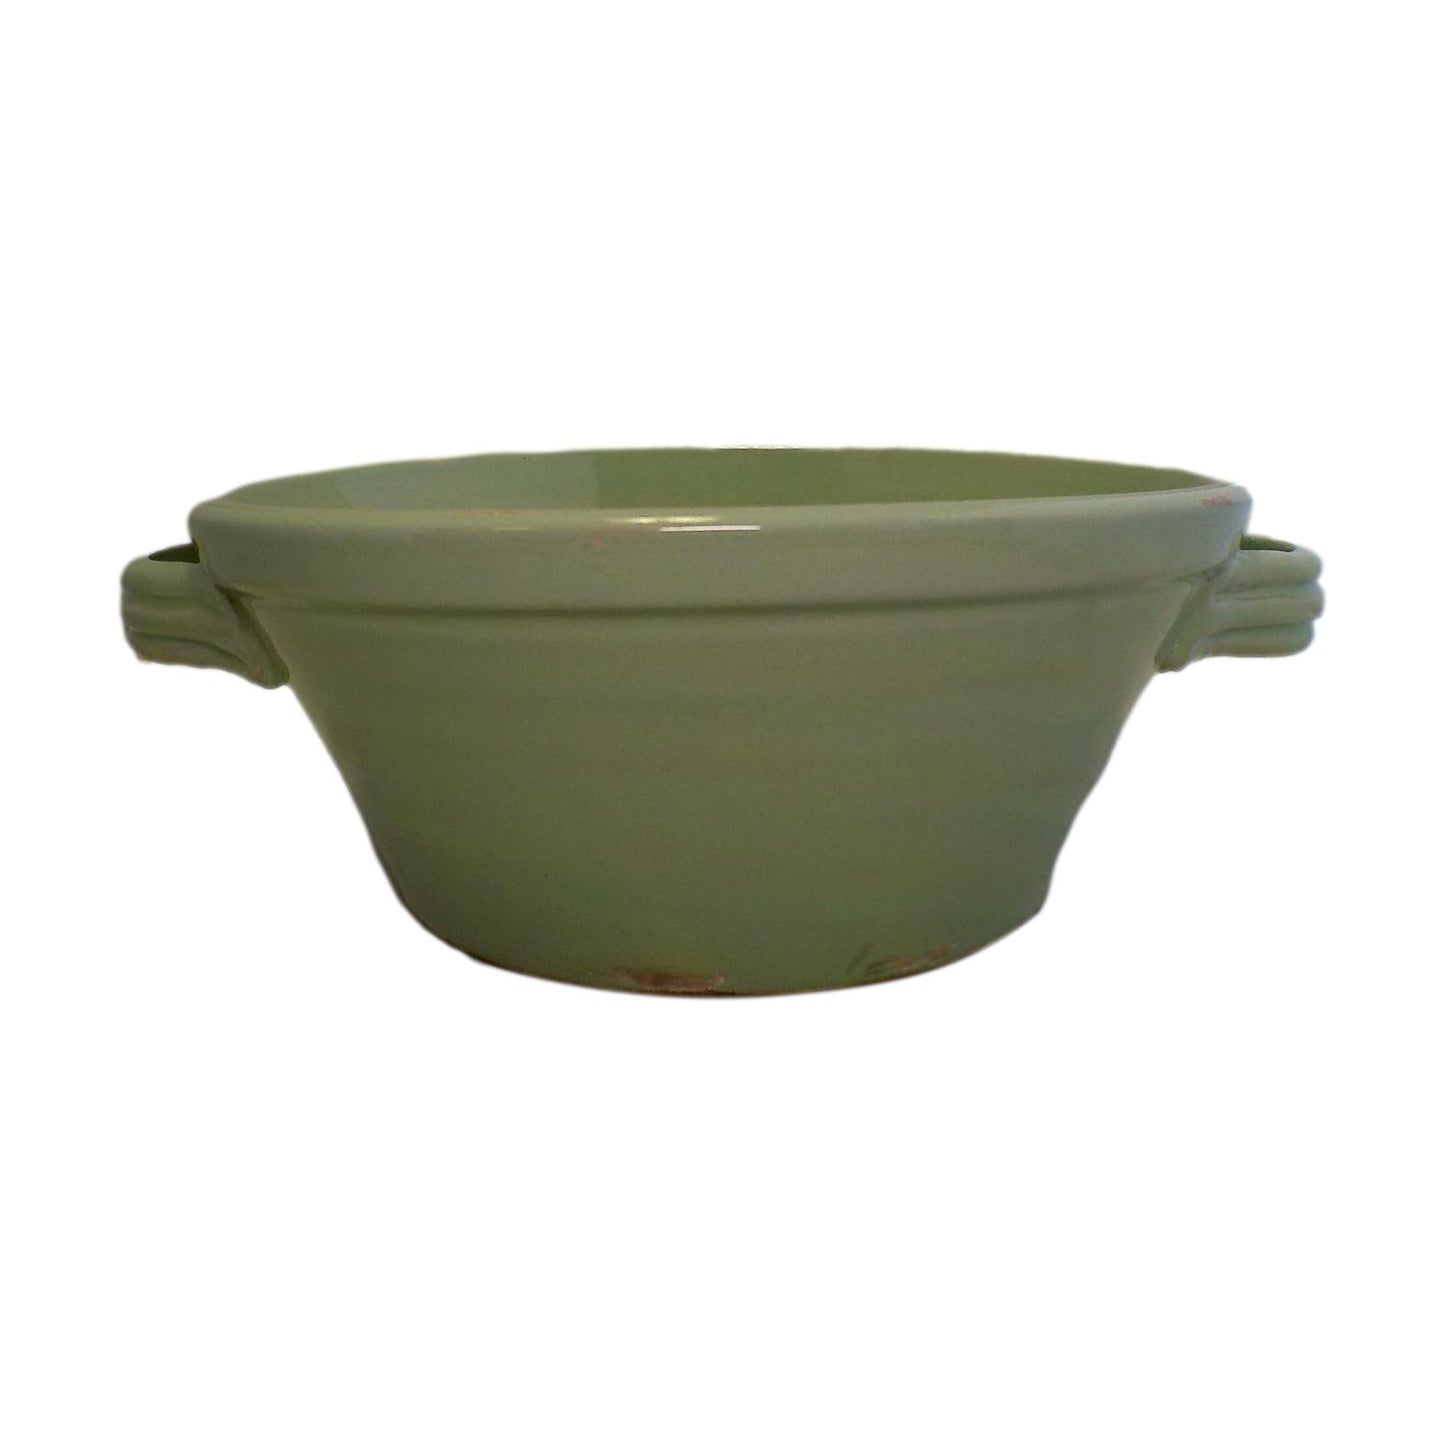 Large Green Mixing Bowl with Handles